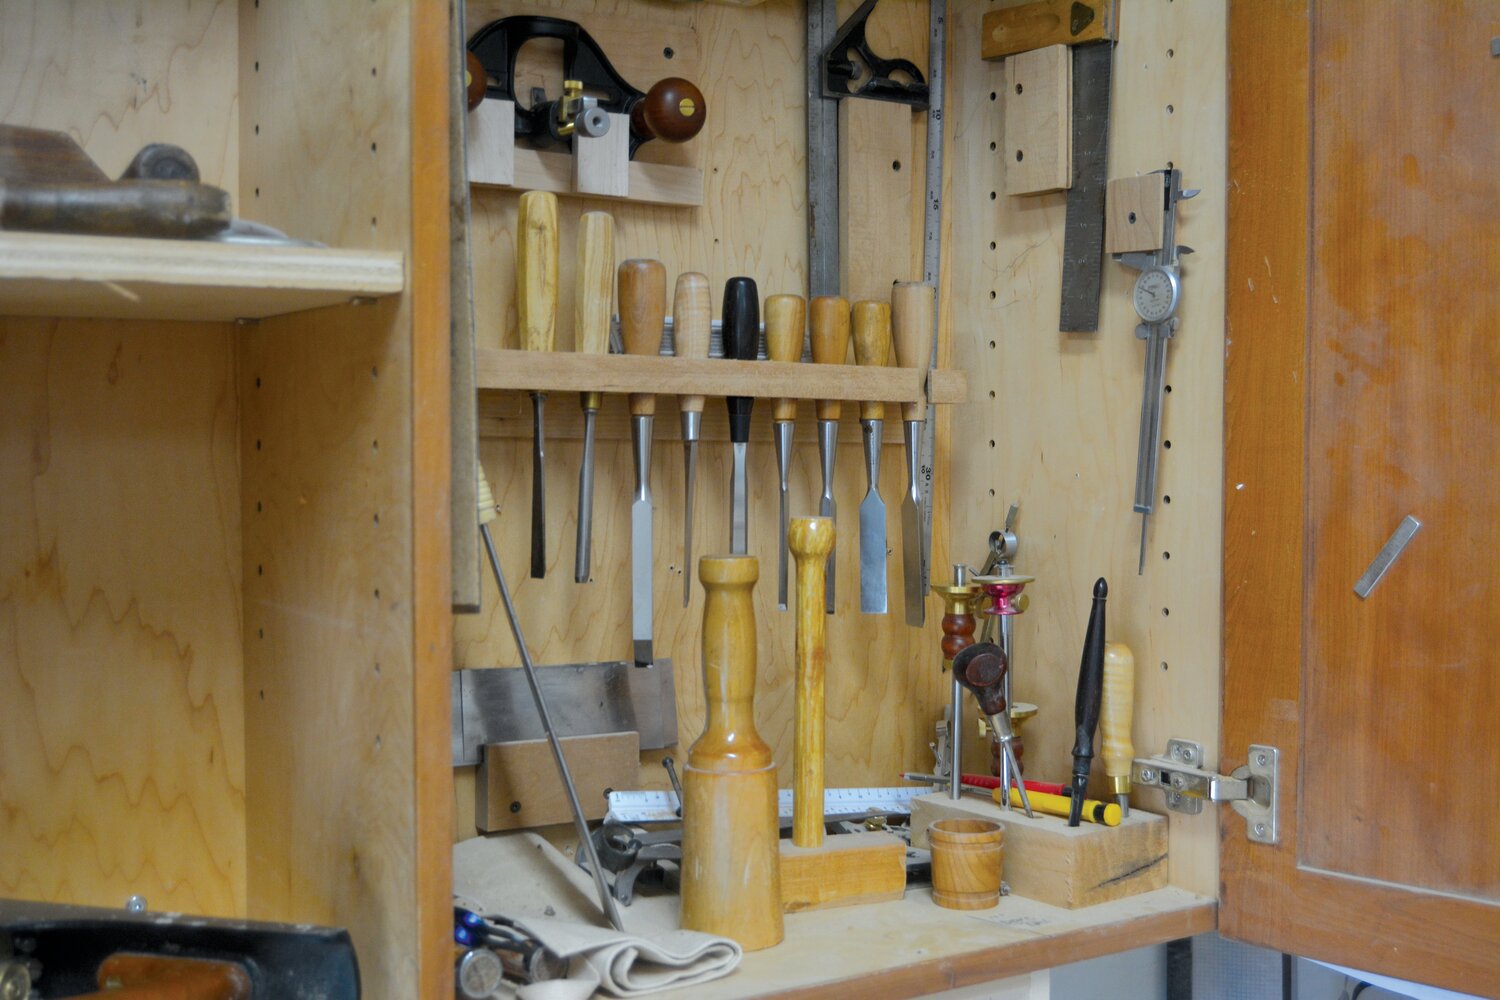 Brian Anderson's tools for crafting furniture and cabinets in his garage.